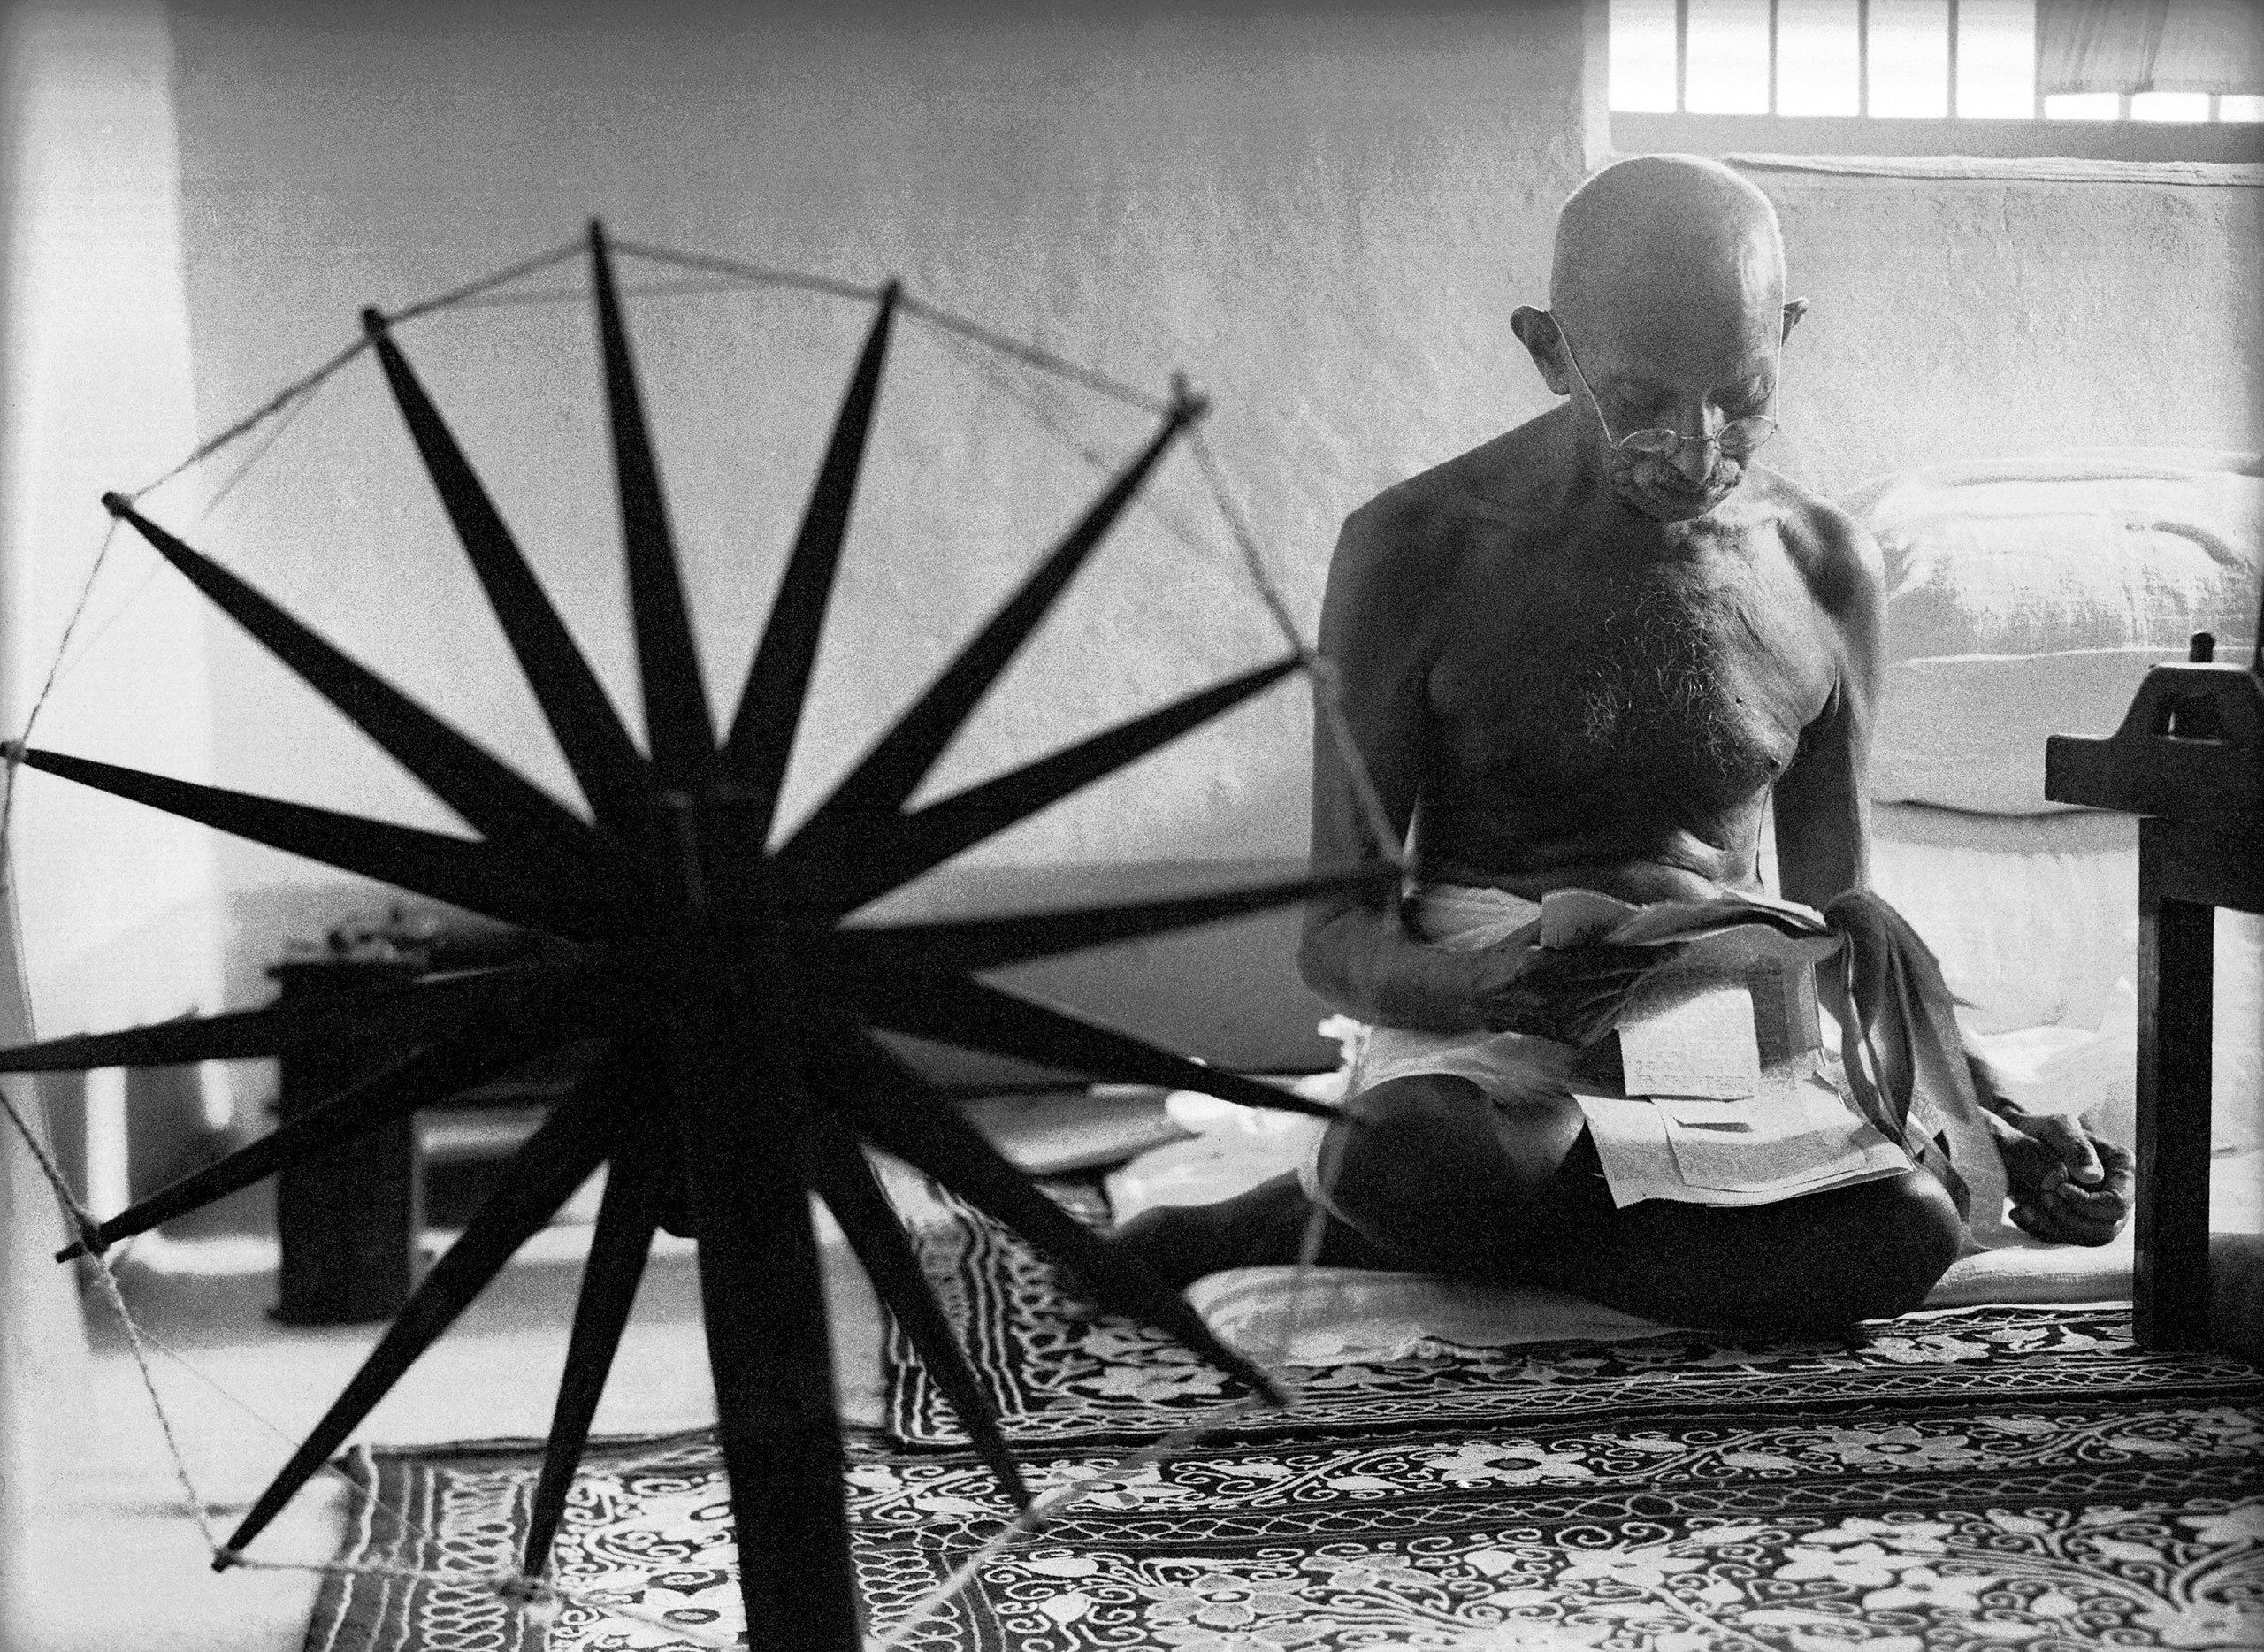 Gandhi and His Spinning Wheel - Perhaps the definitive photo of Mohandas Gandhi was taken by Margaret Bourke-White, LIFE magazine’s first female photographer. It depicts Gandhi reading the news next to his portable spinning wheel, which had become a potent exemplar of the campaign for independence after Ghandi had encouraged his countrymen to make their own homespun cloth instead of purchasing British goods.